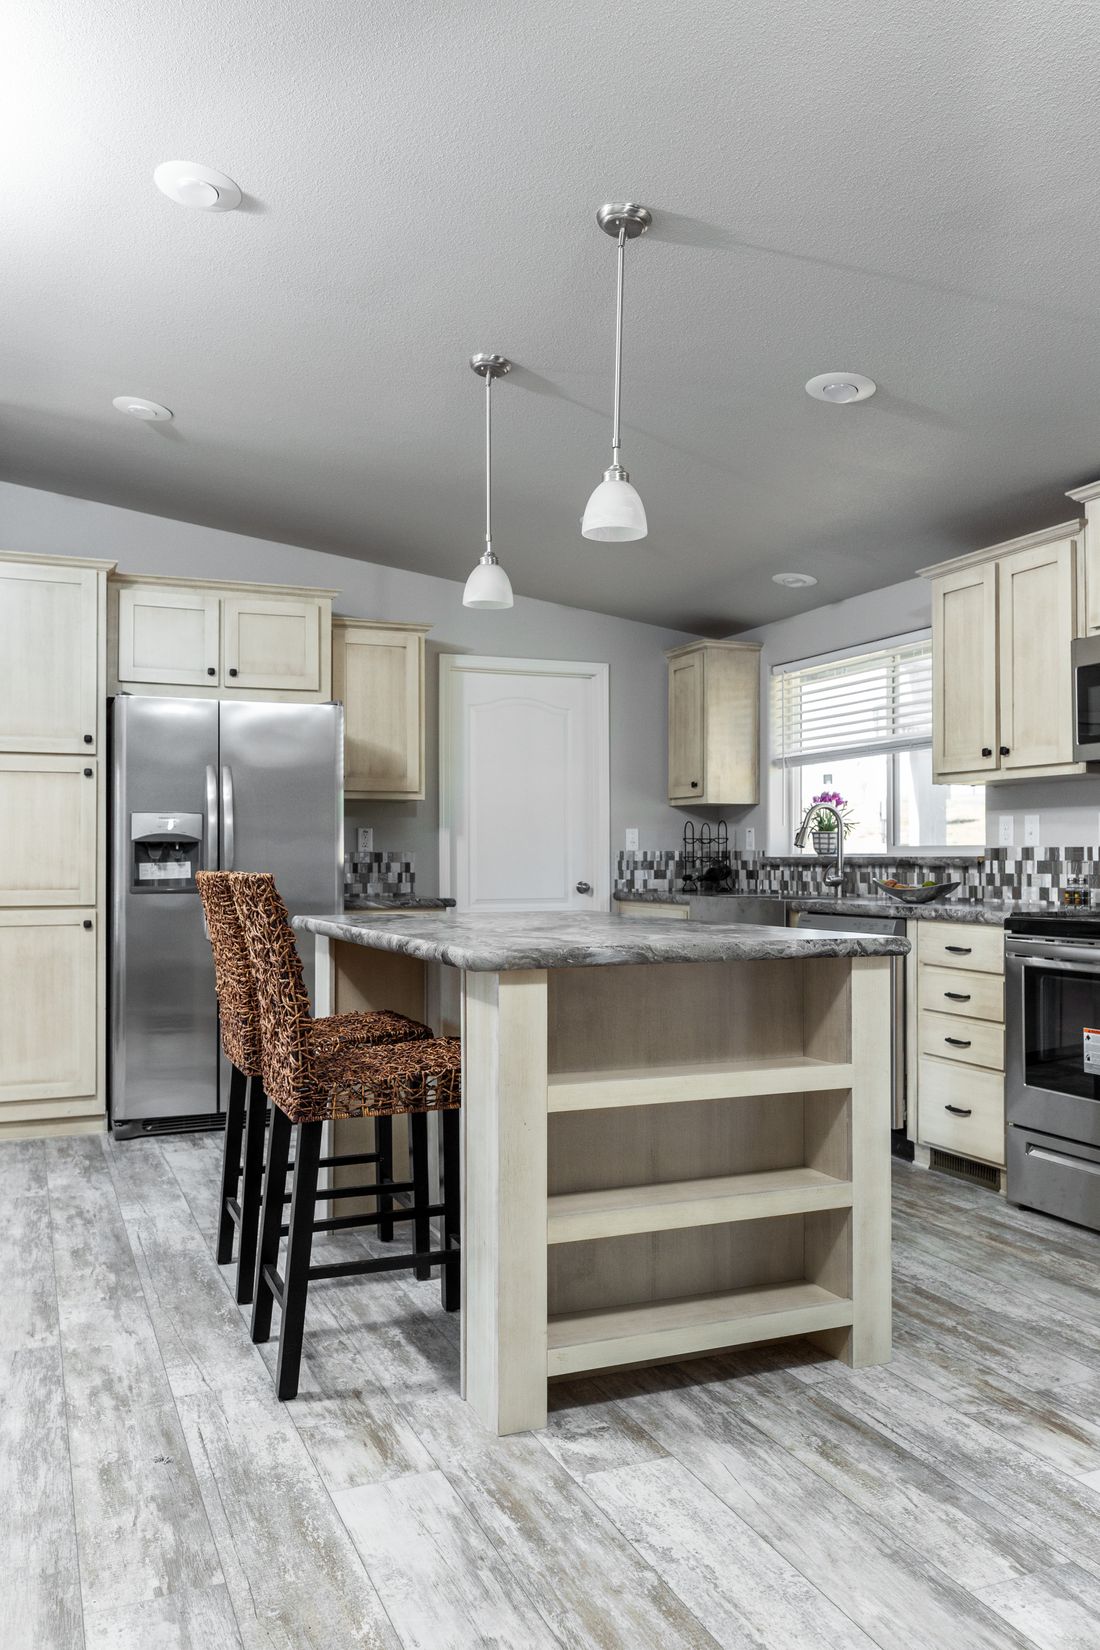 The 2860 MARLETTE SPECIAL Kitchen. This Manufactured Mobile Home features 3 bedrooms and 2 baths.